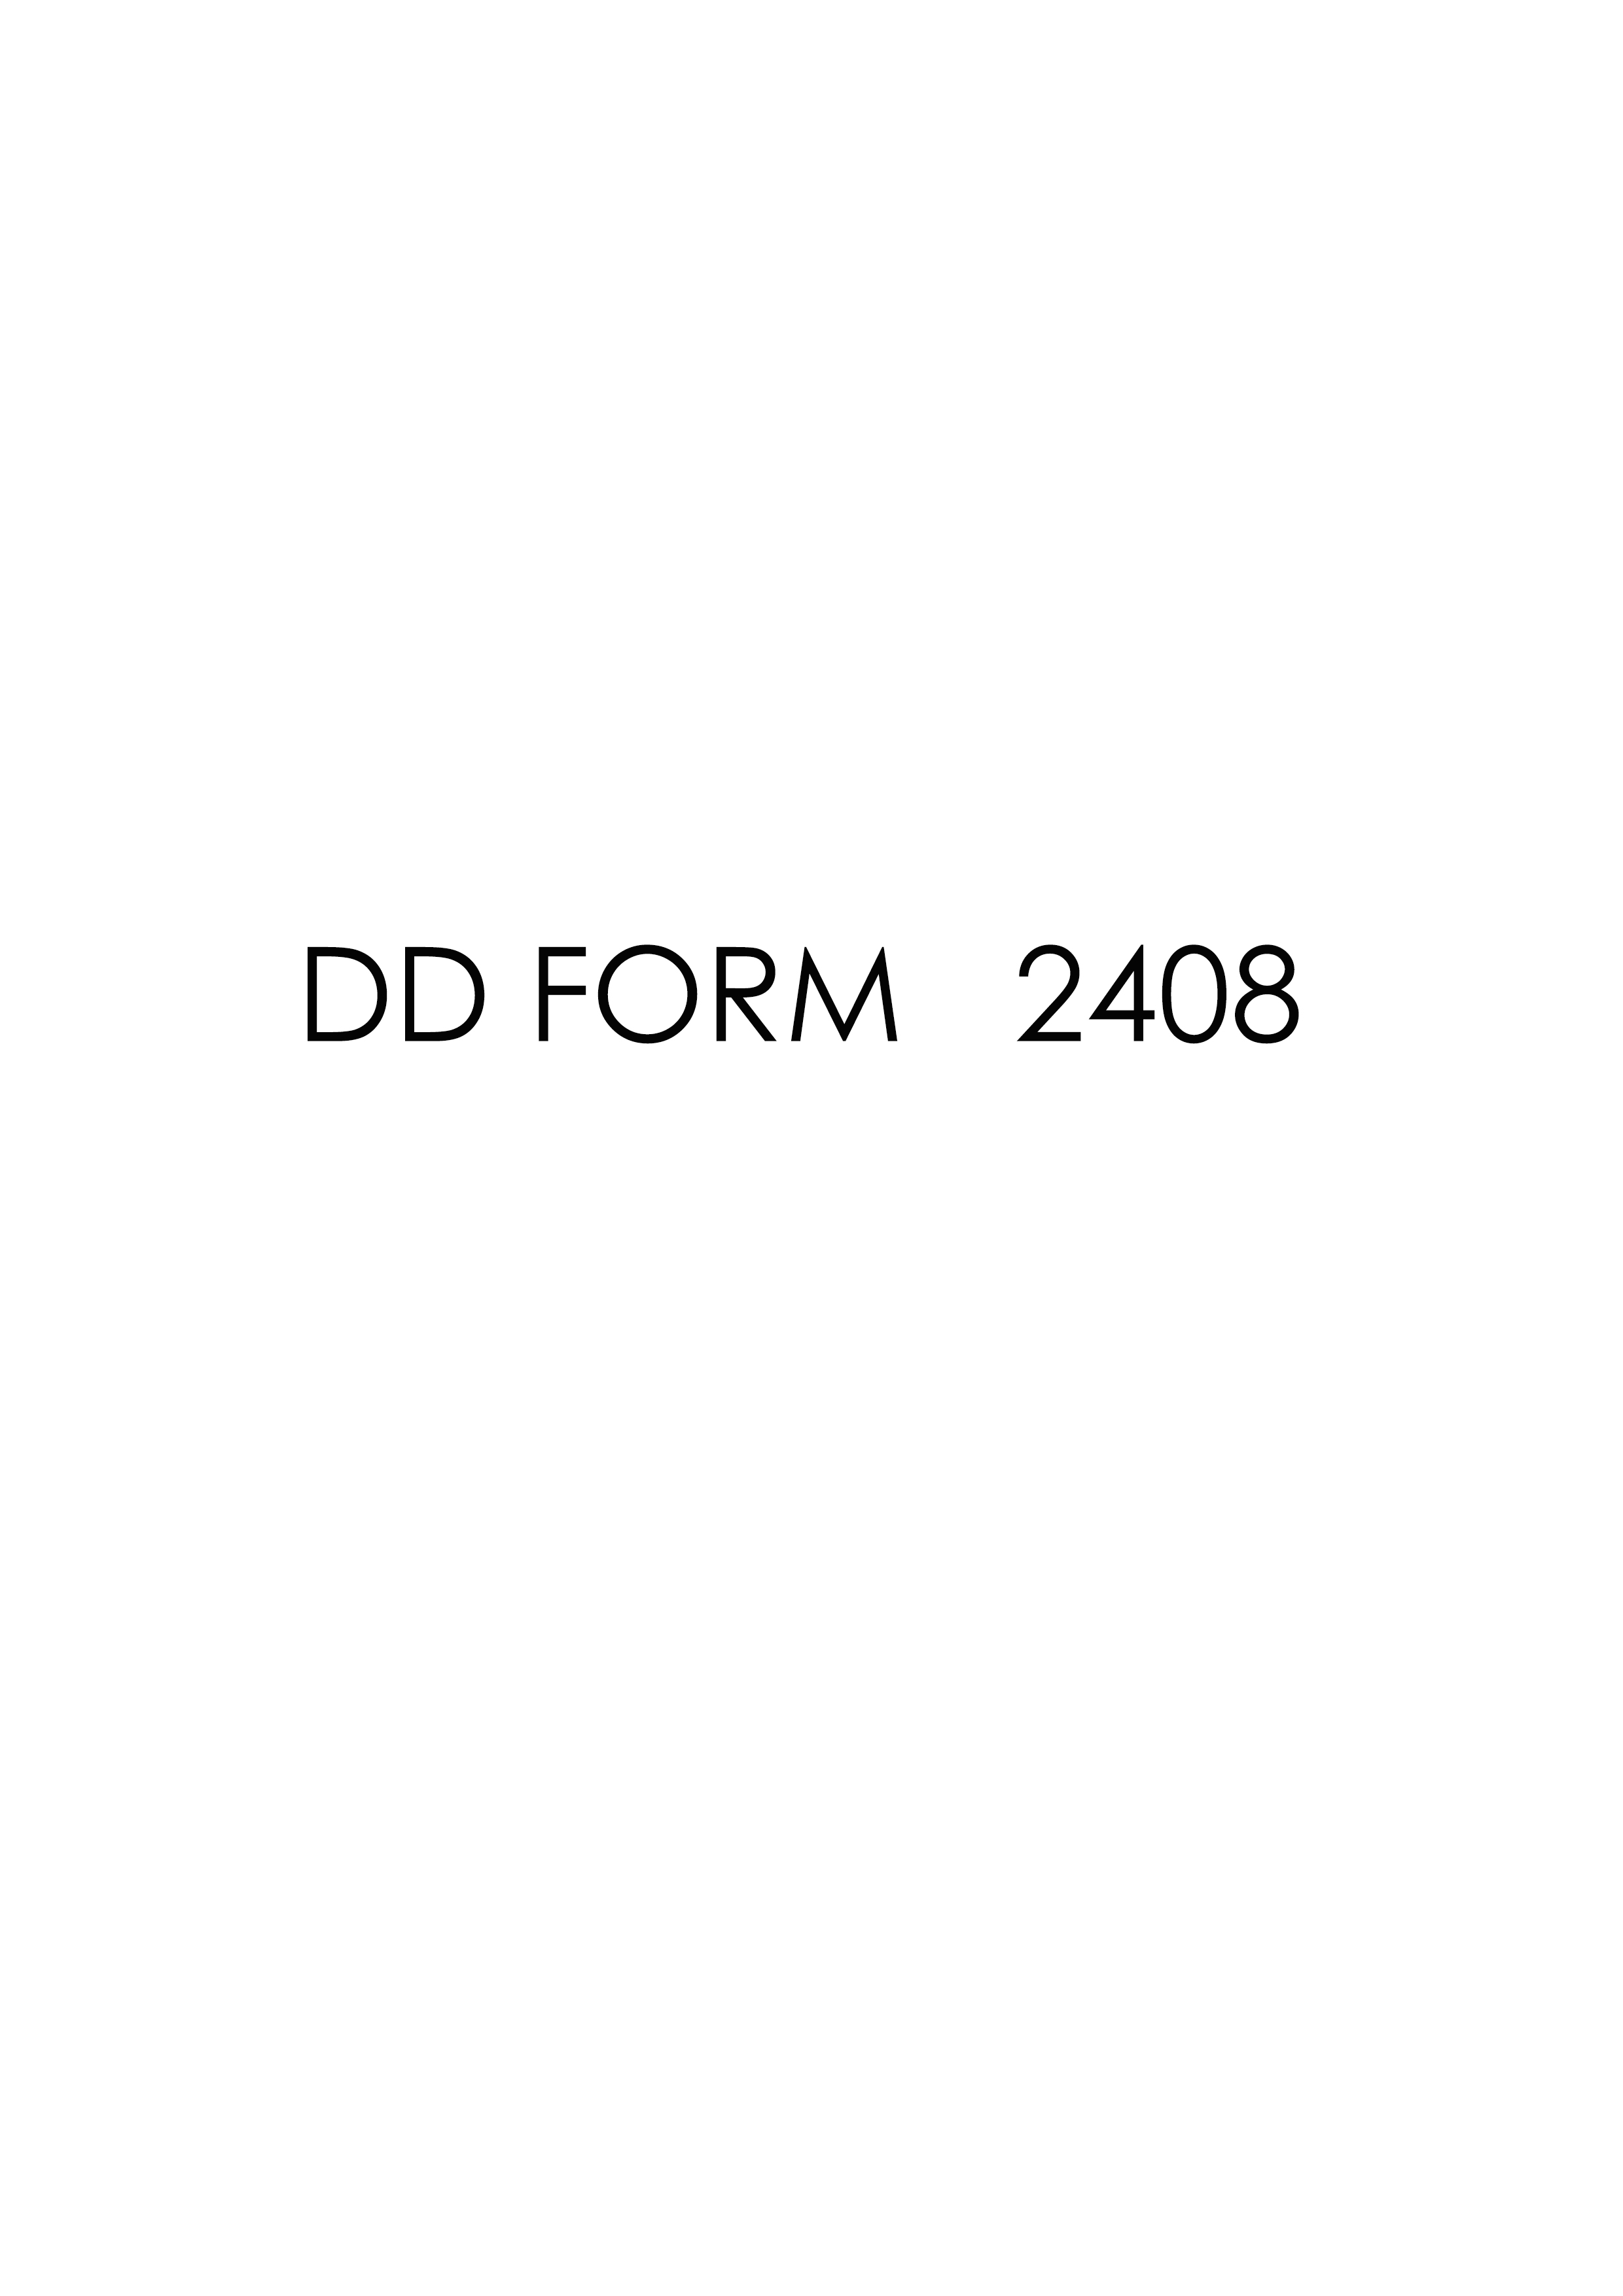 Download Fillable dd Form 2408